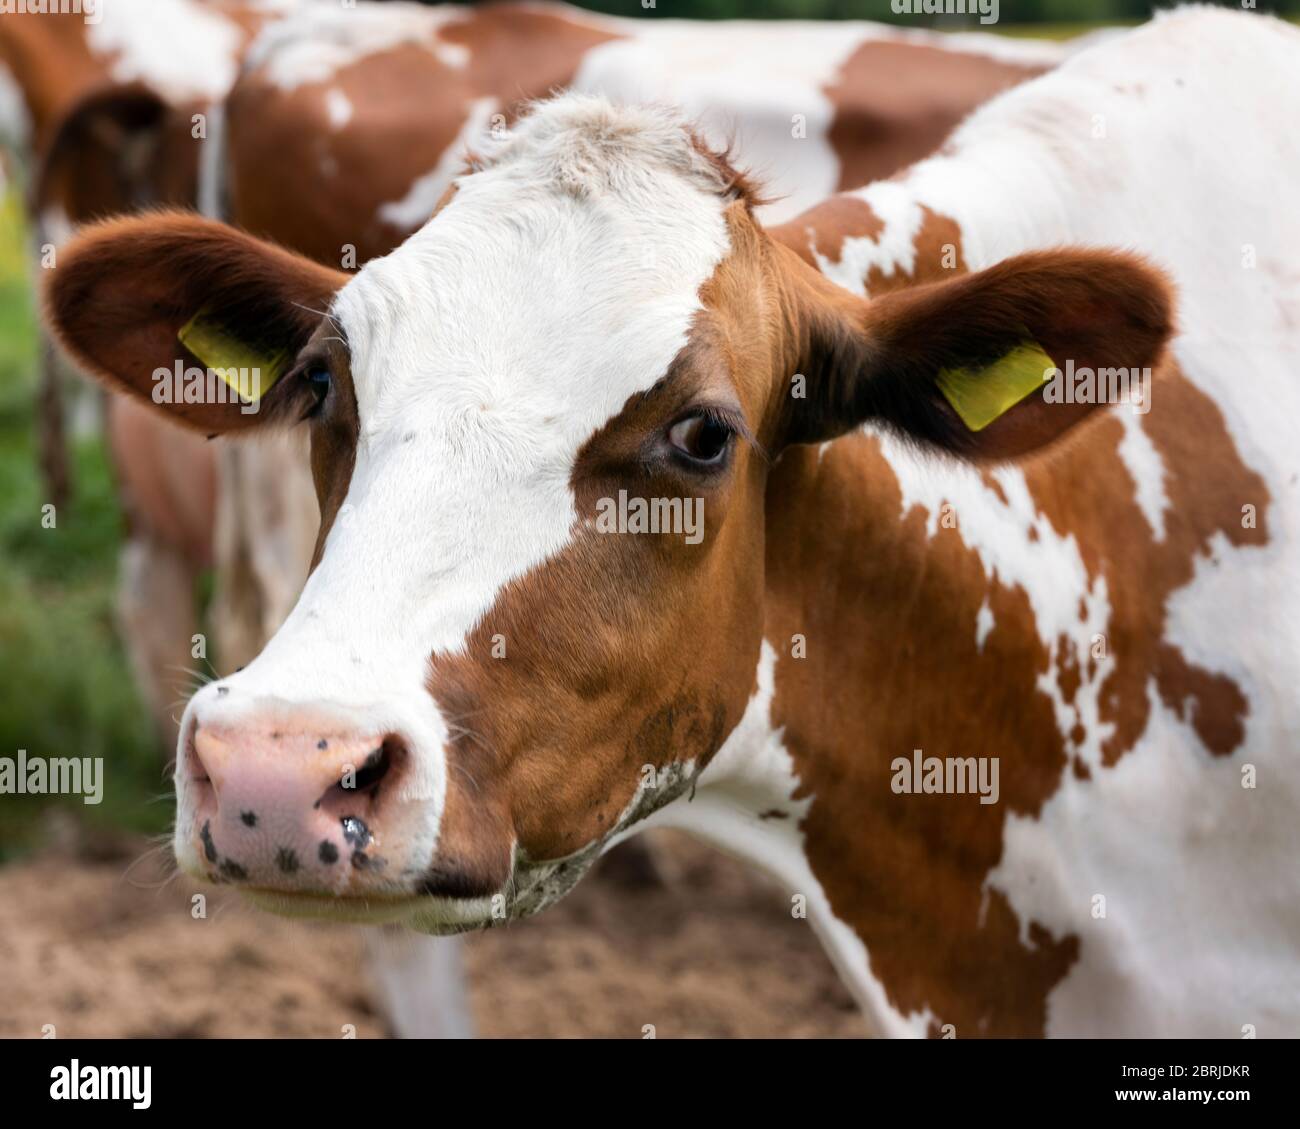 head of red and white spotted cow Stock Photo